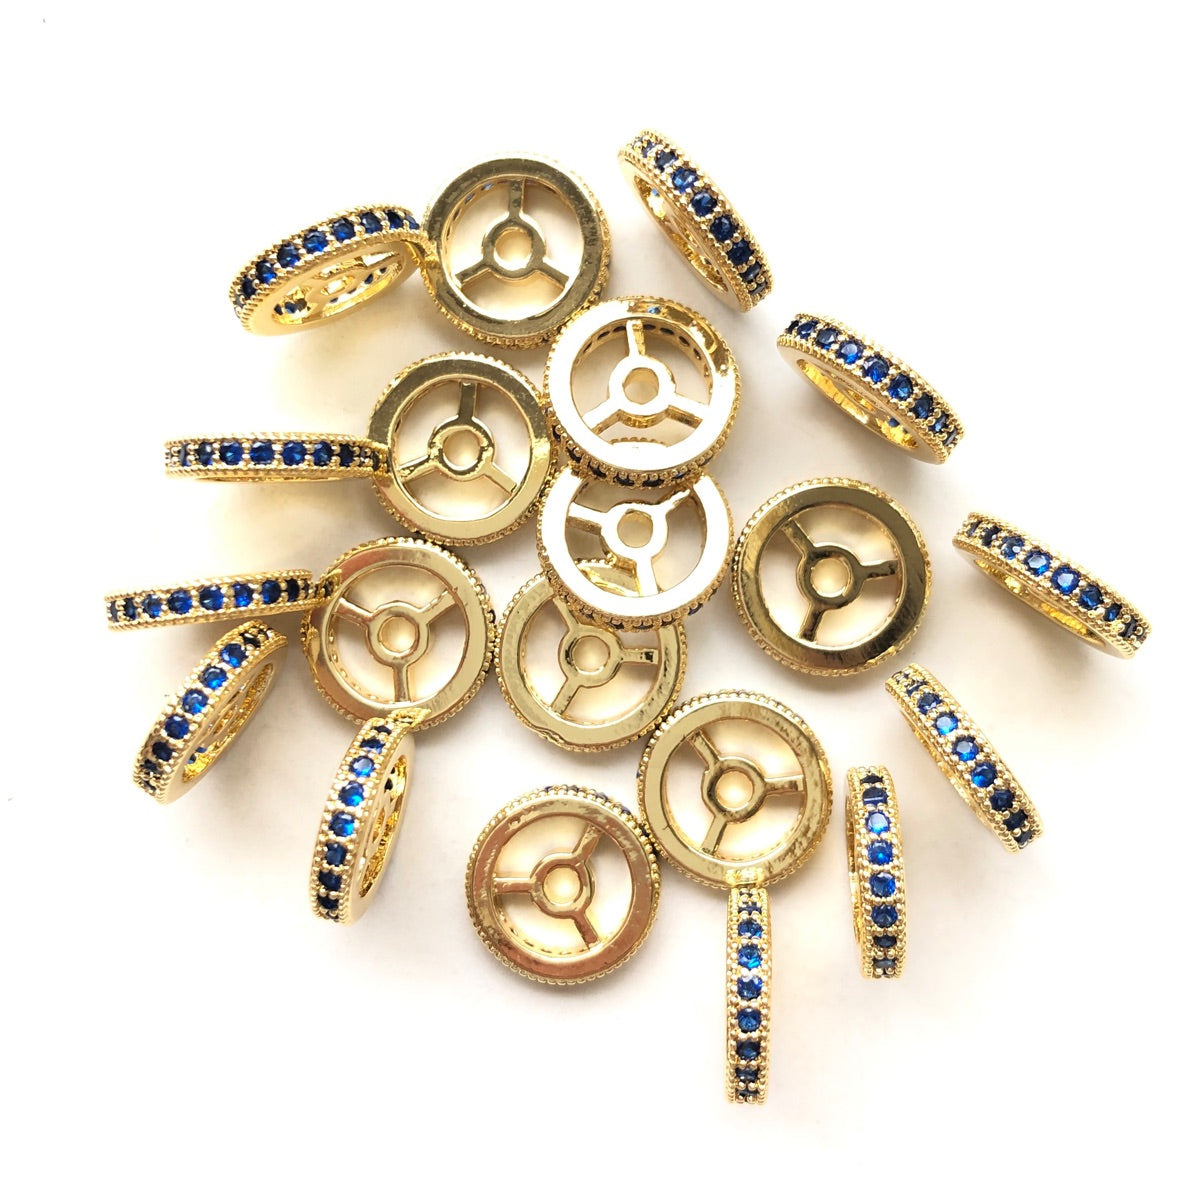 20pcs/lot 9.6/12mm Blue CZ Paved Wheel Rondelle Spacers Gold CZ Paved Spacers New Spacers Arrivals Rondelle Beads Charms Beads Beyond